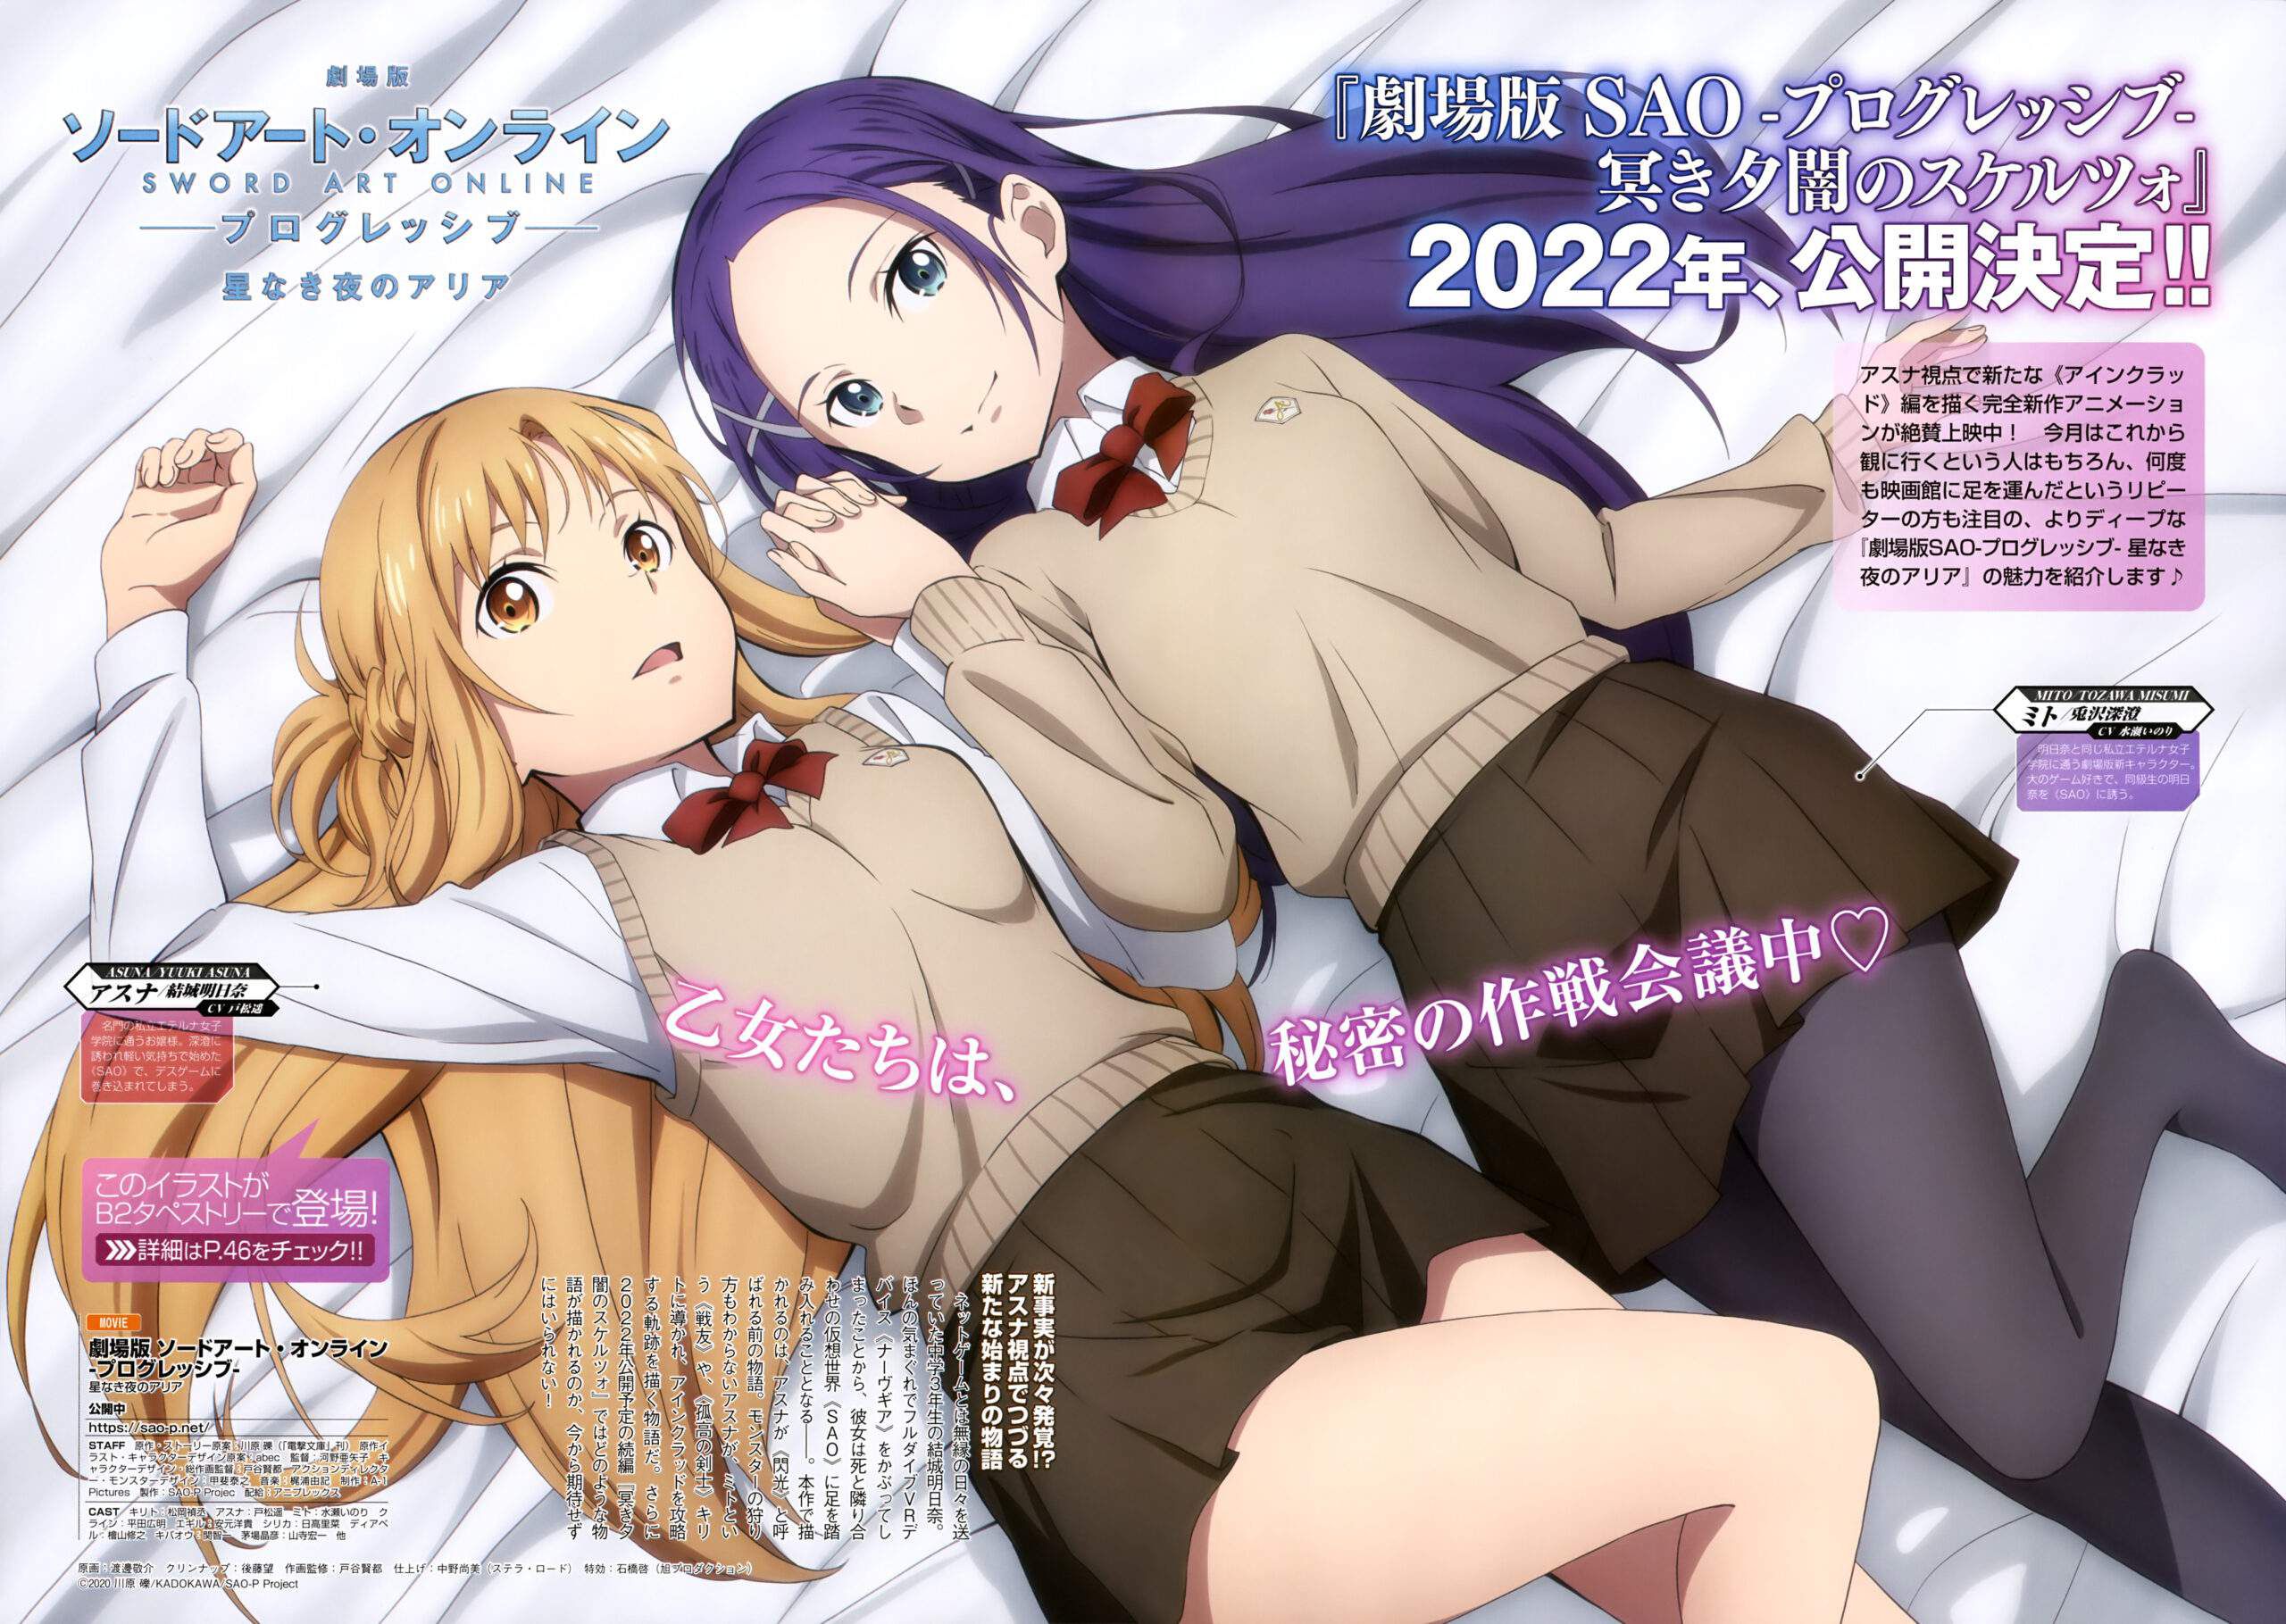 [Sword Art Online (SAO)] Erotic images such as Asuna-chan 75th 36